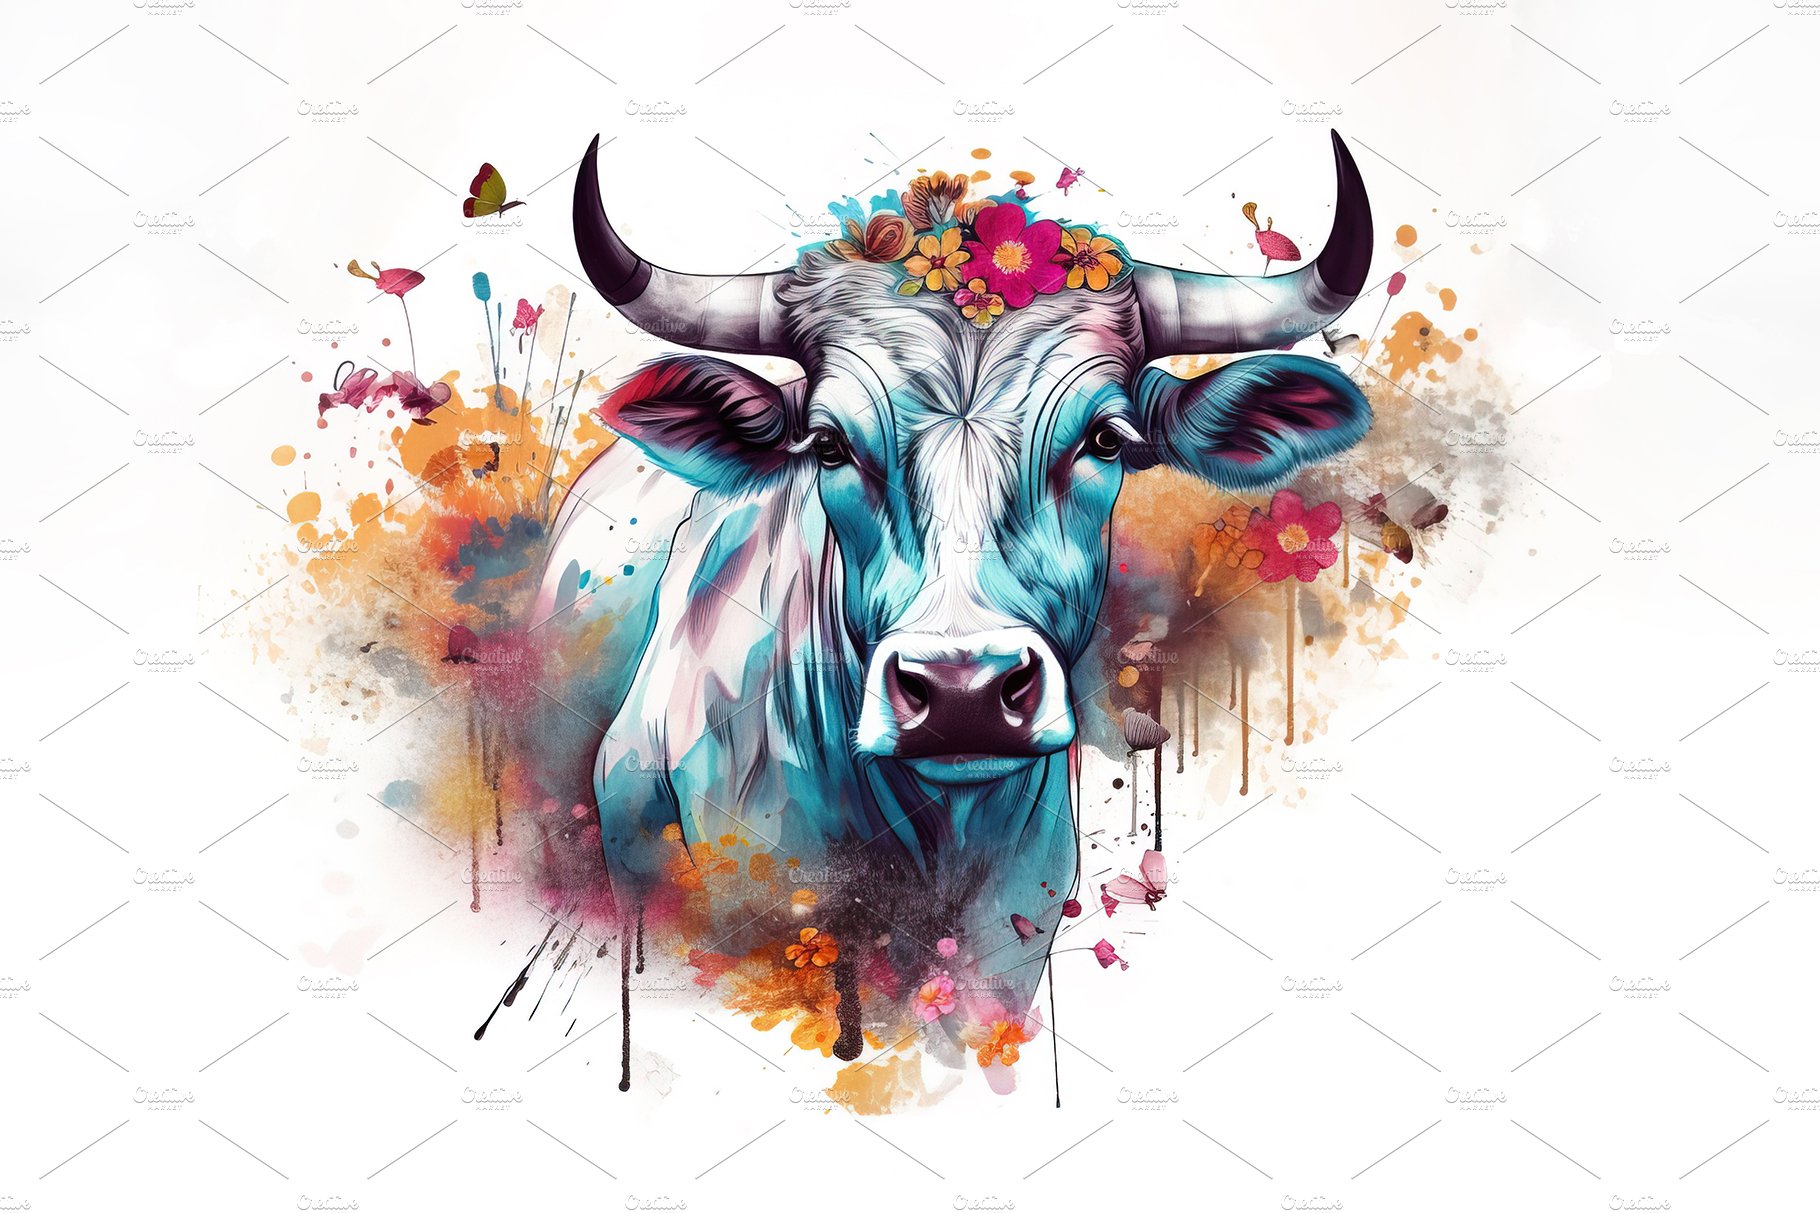 Painting a cow head with flowers. cover image.